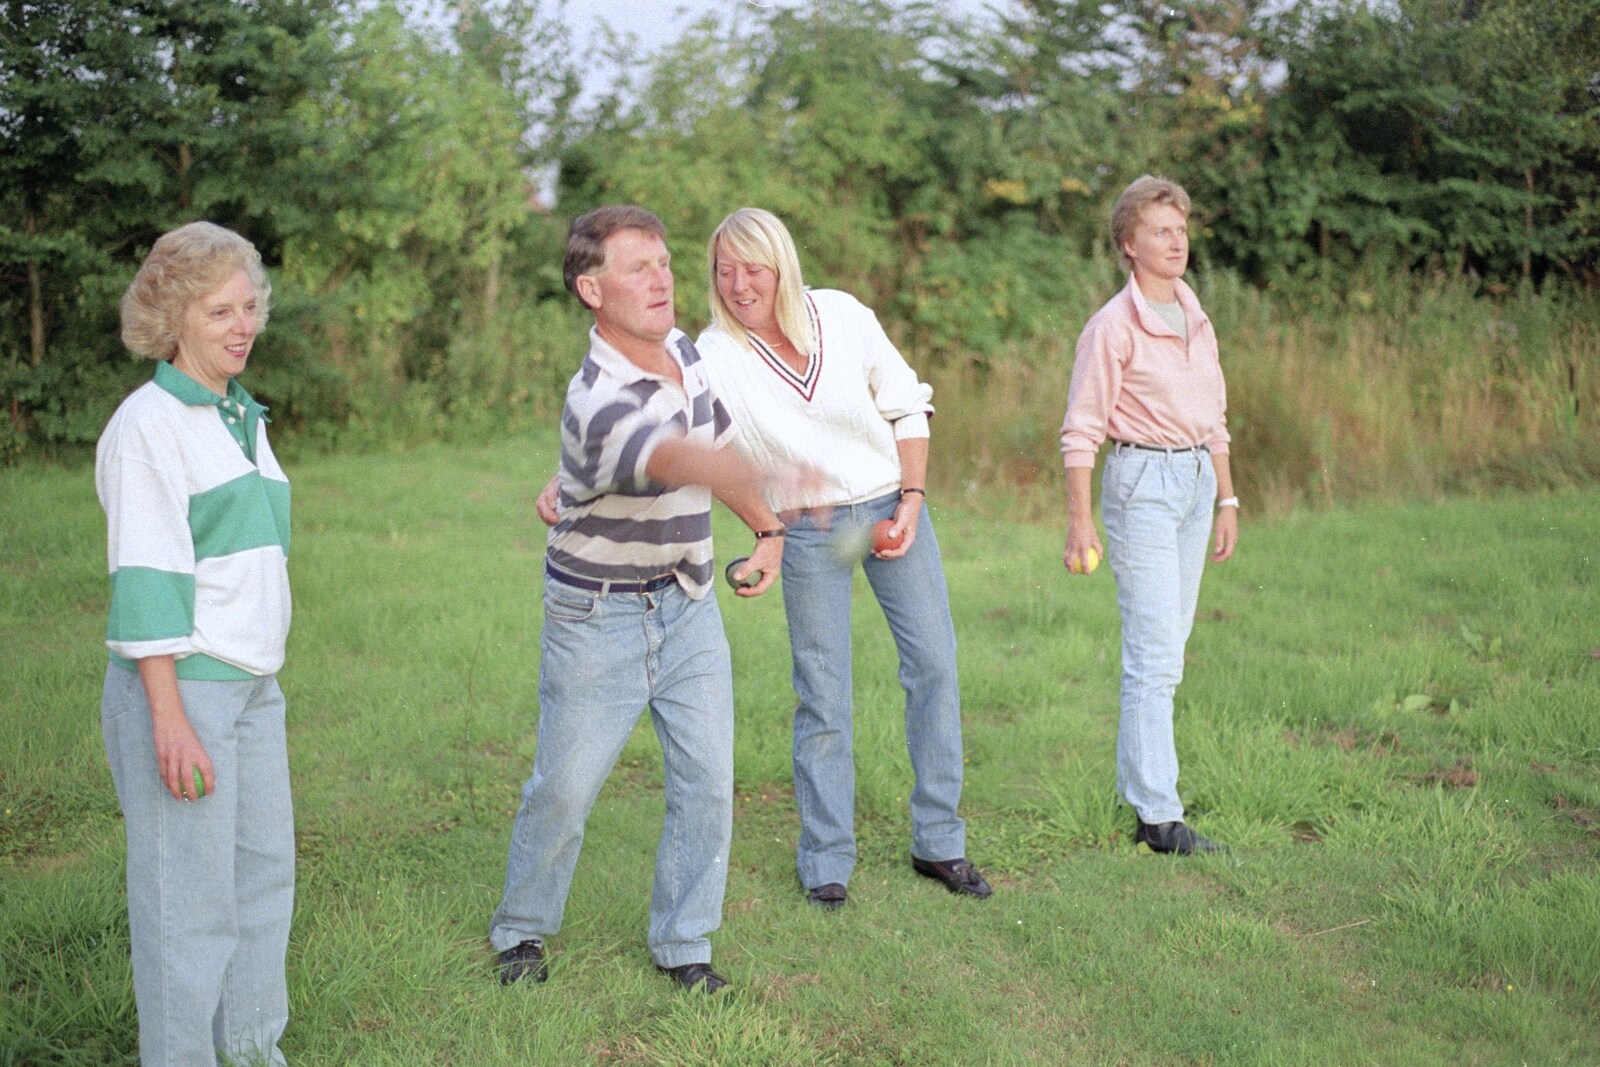 Sue's Fire Dance, Stuston, Suffolk - 21st July 1990: Bernie joins in the game of boules